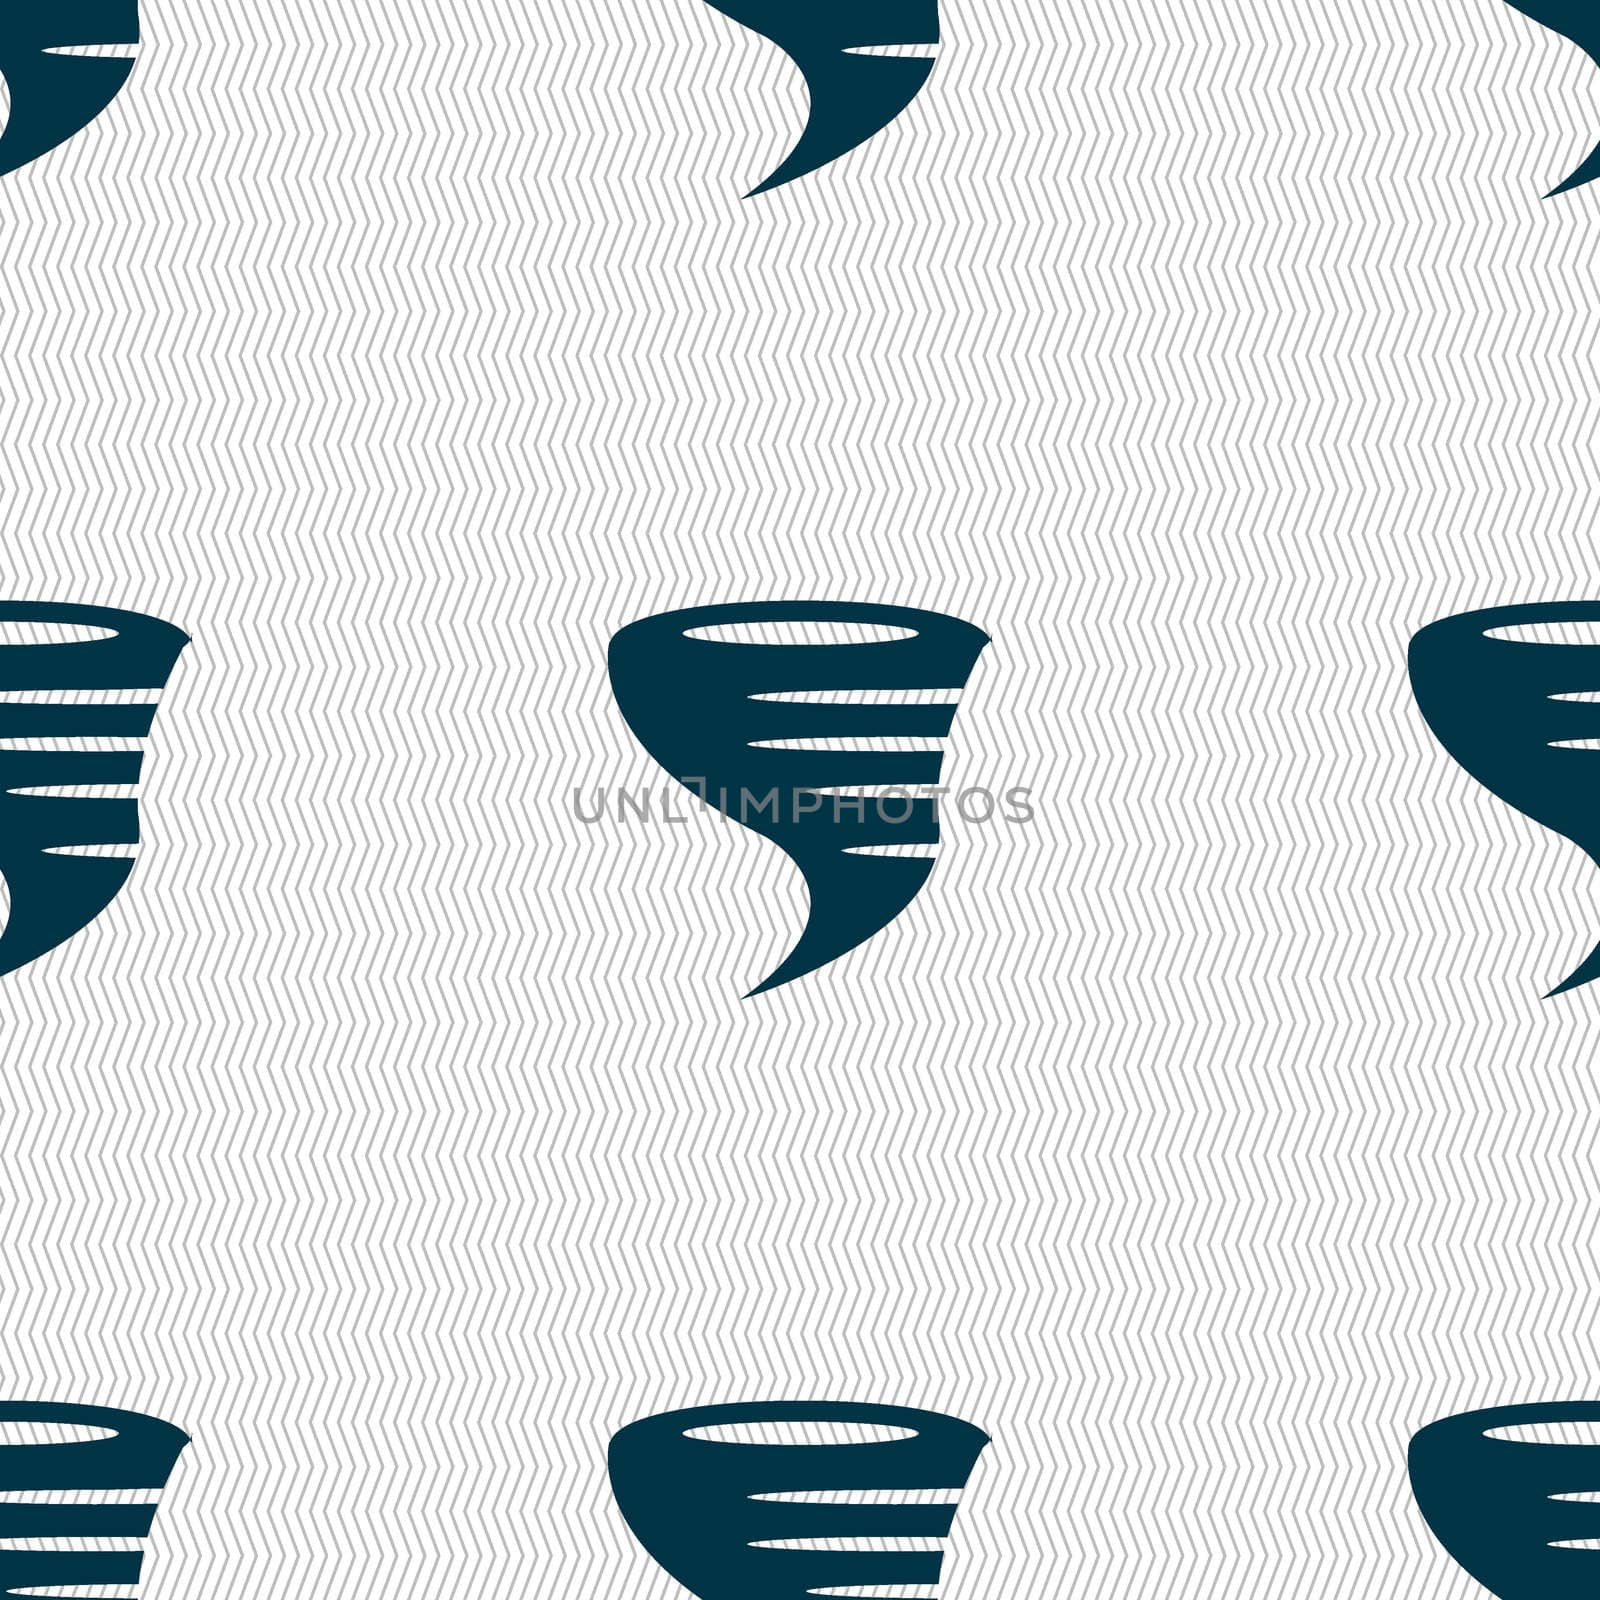 Tornado icon. Seamless abstract background with geometric shapes. illustration